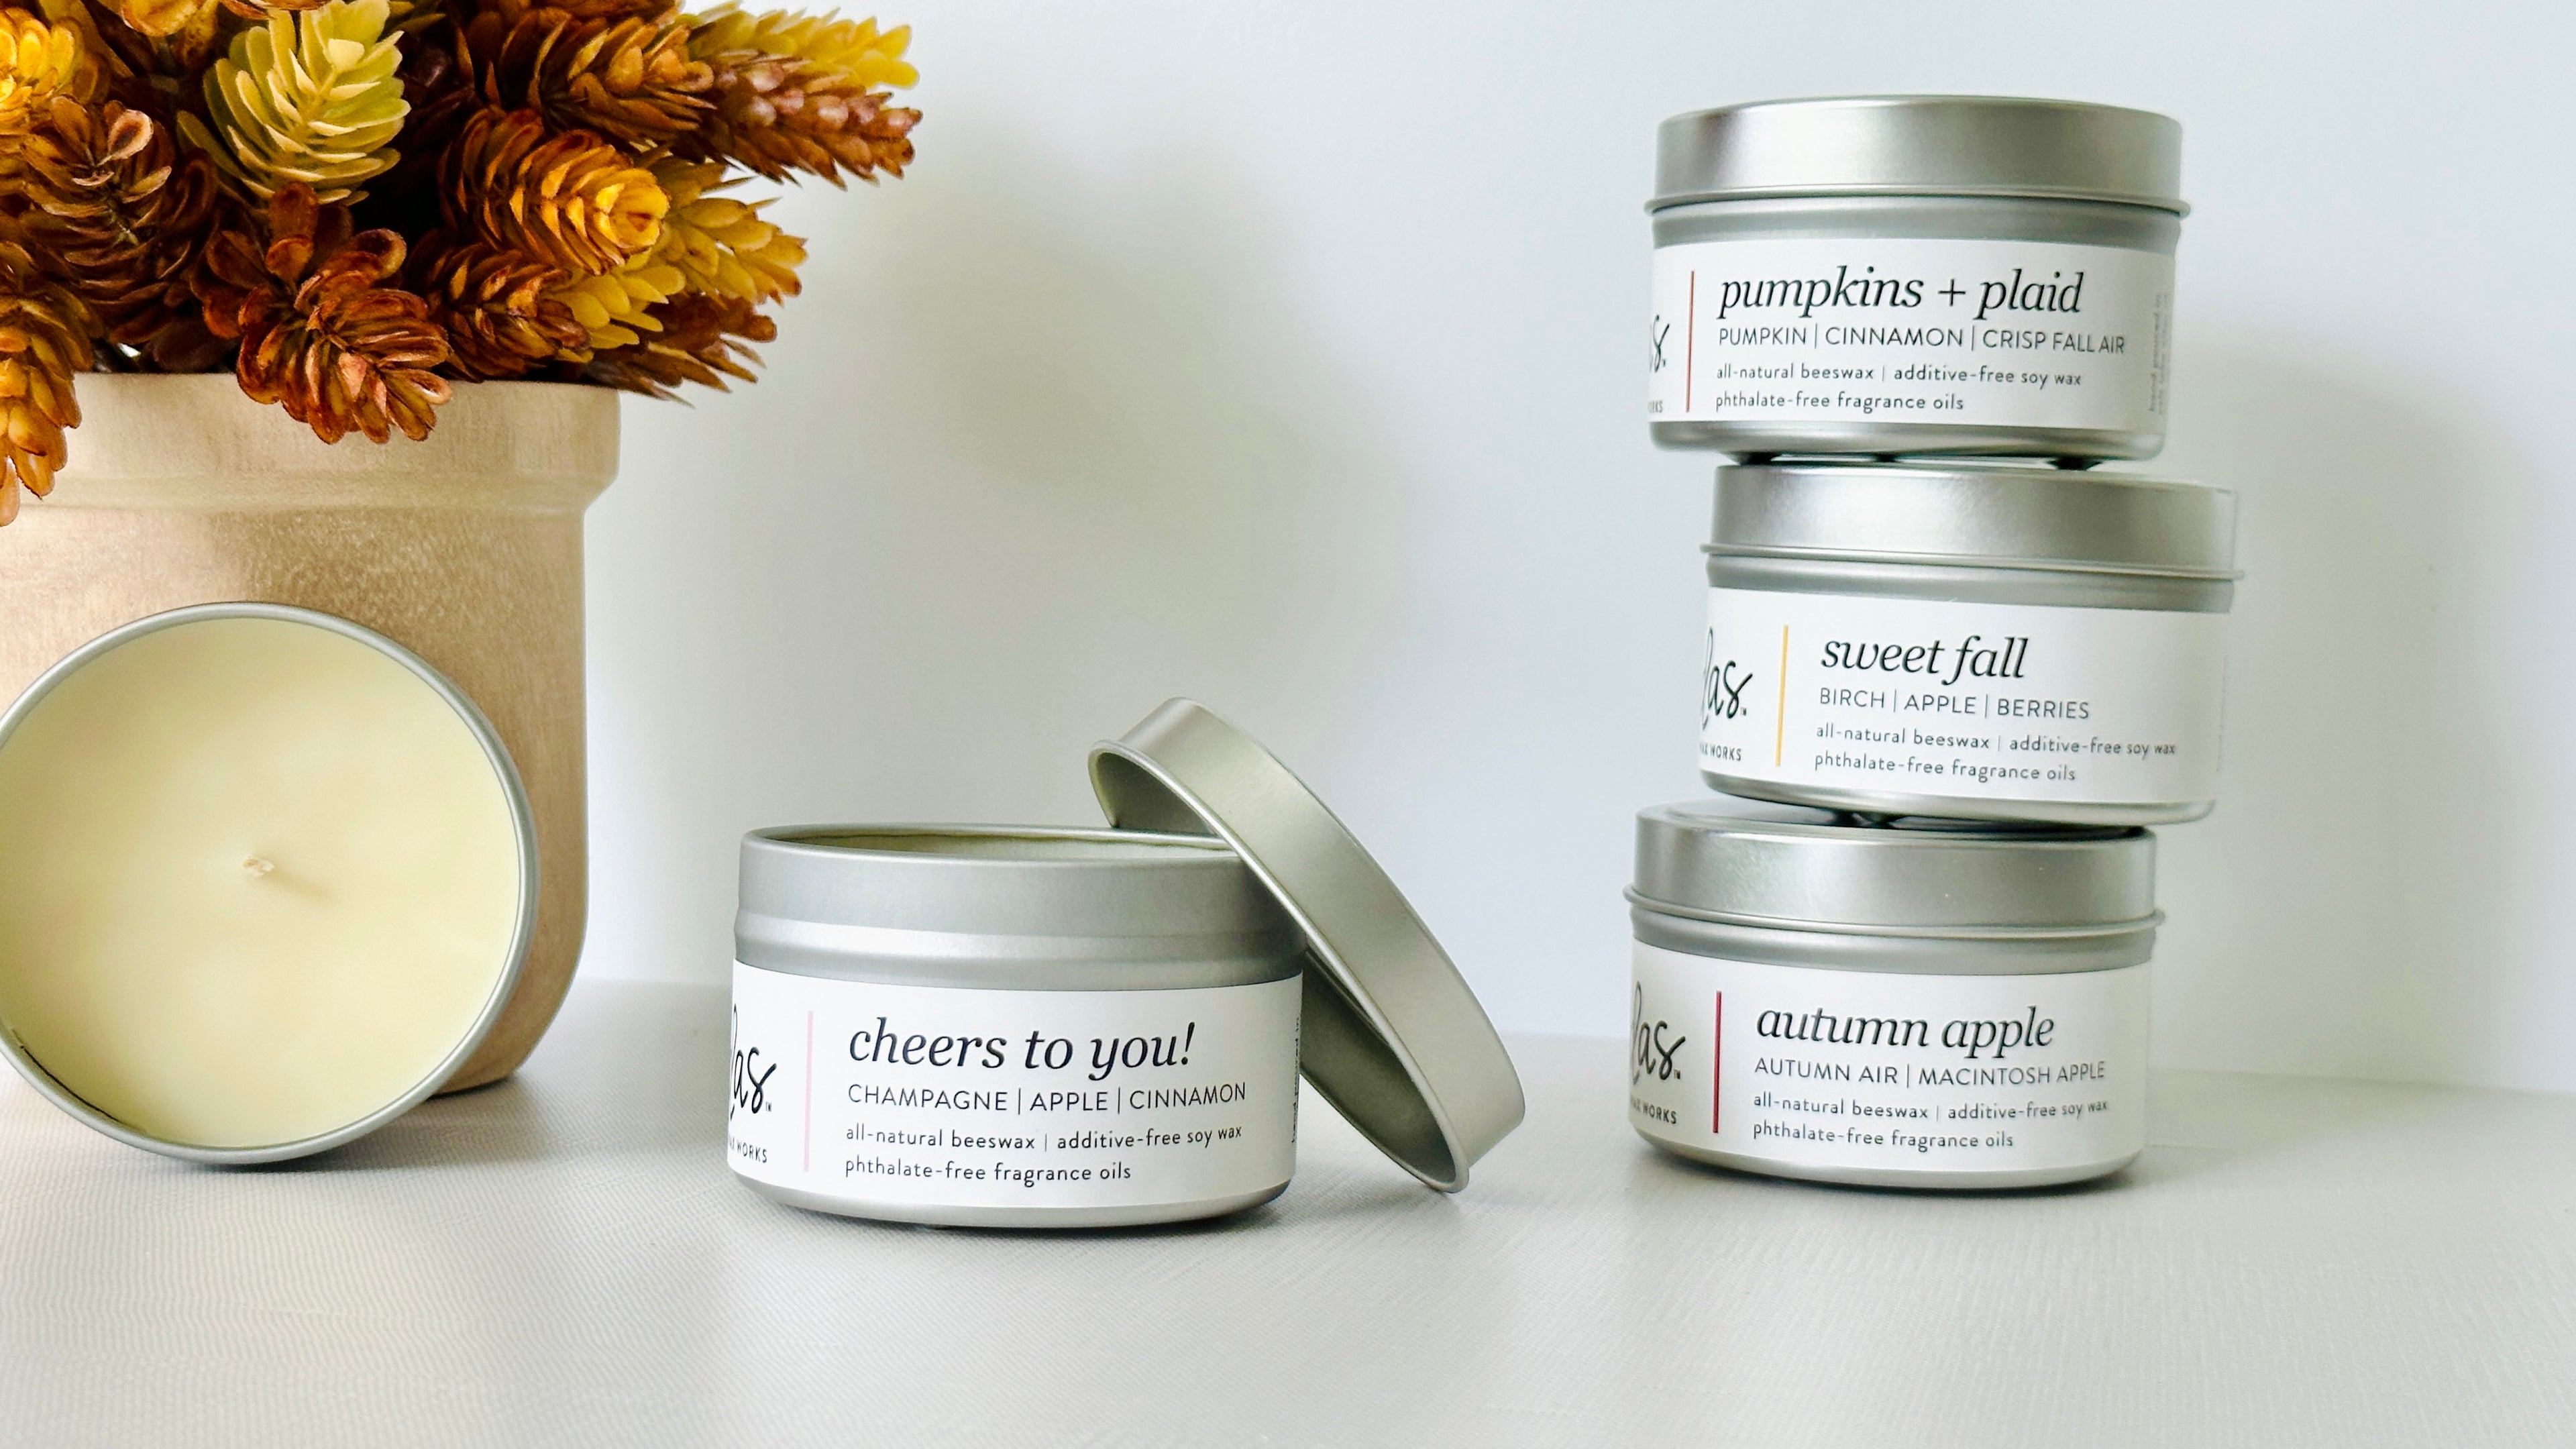 Immerse yourself in the essence of autumn. A 3.5oz open candle, shares space with a rustic fall plant on the left. On the right, a delightful stack of three 3.5oz candles stands tall, each ready to kindle the spirit of the season.